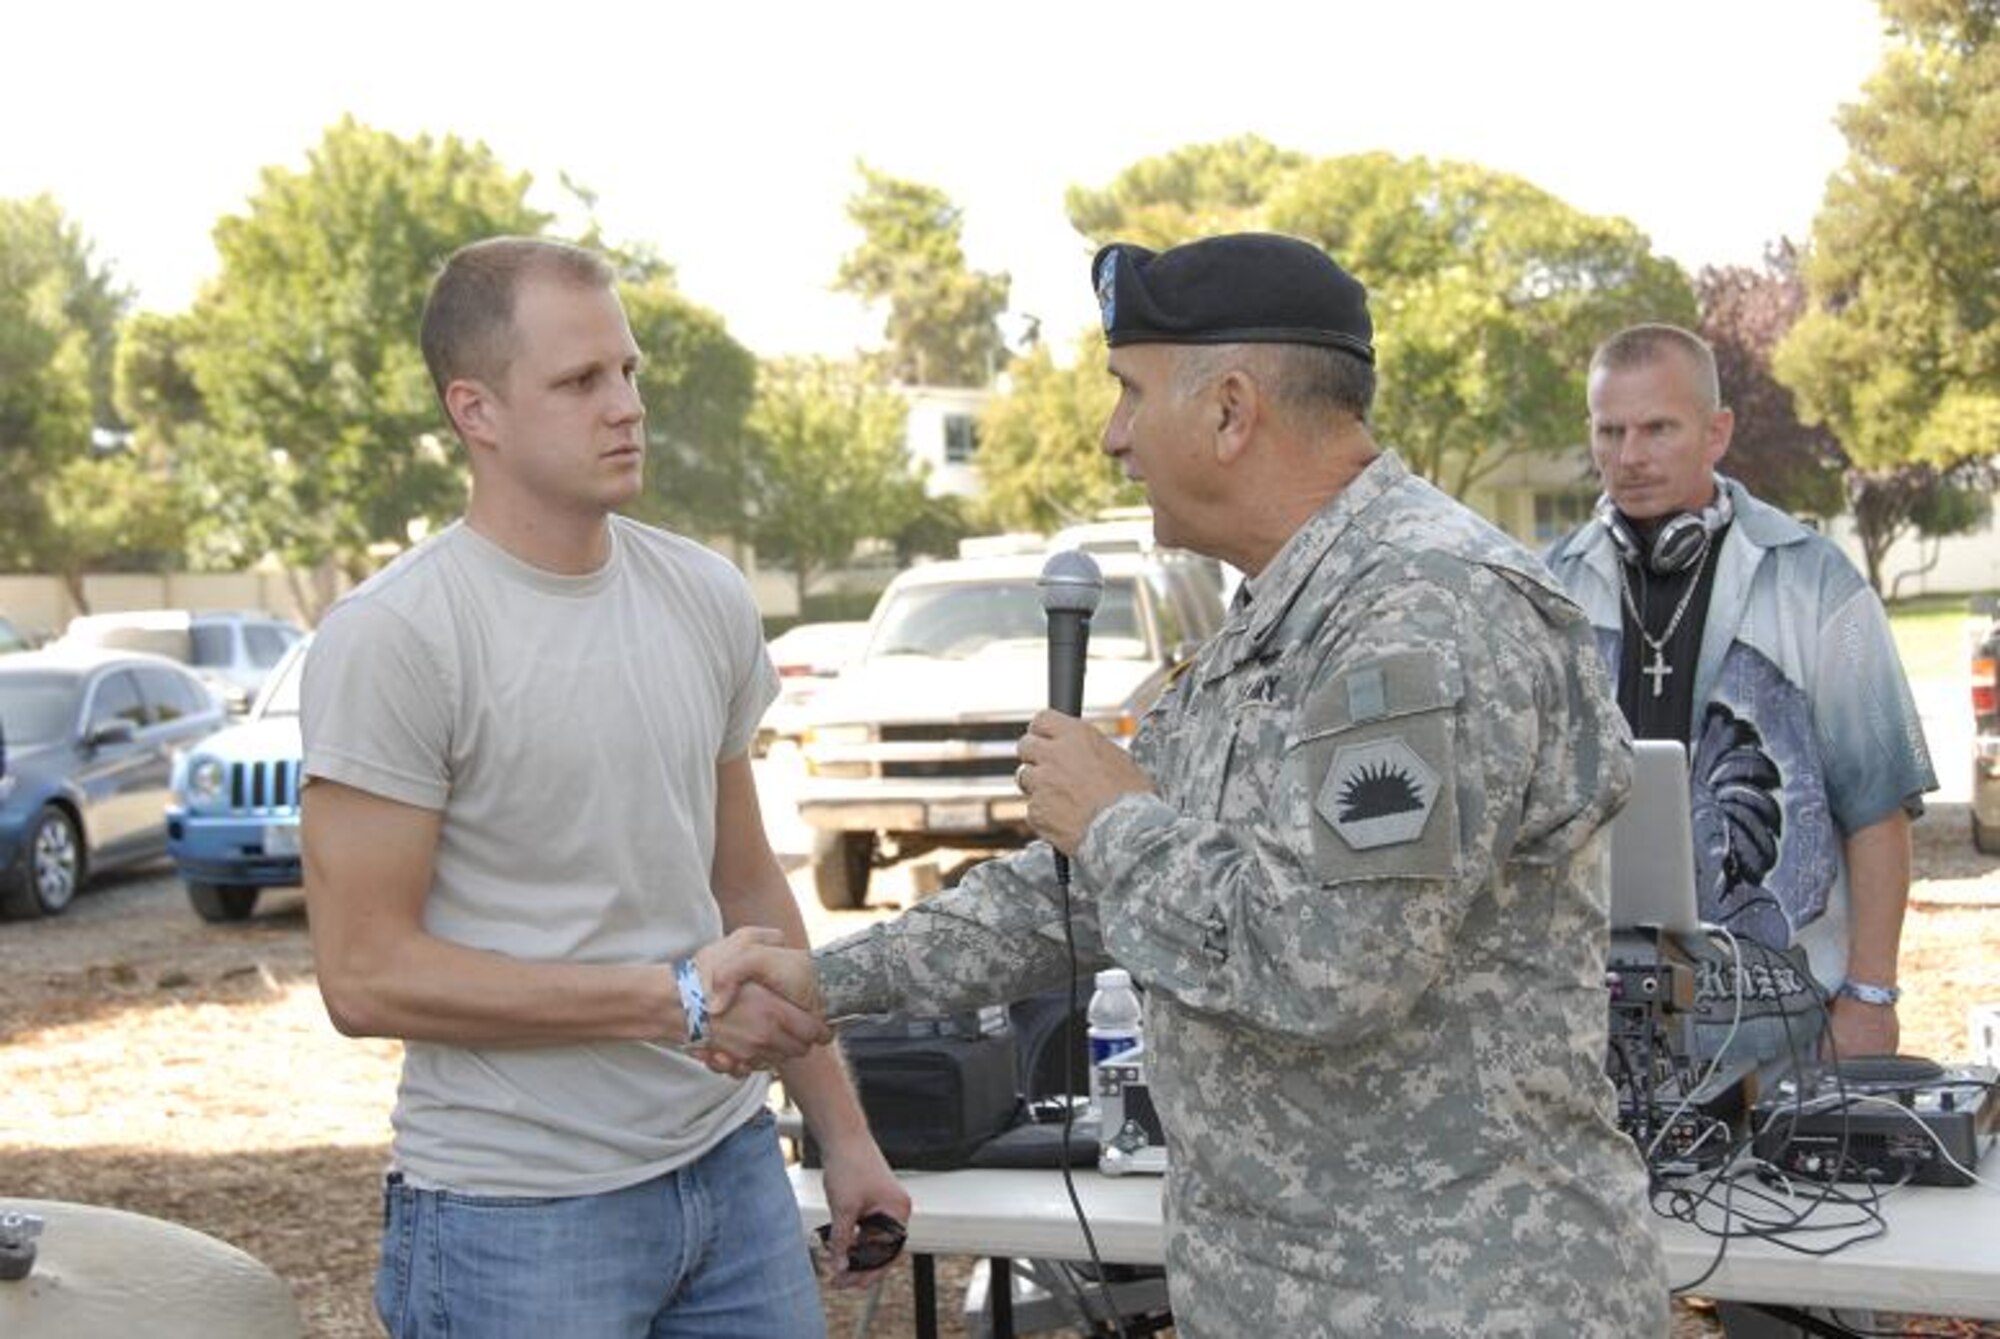 Maj. Gen. William H. Wade, the California Adjutant General, congratulates Senior Airman James Parmentier, a guidance and control systems avionics technician with the 129th Aircraft Maintenance Squadron, at the 129th Rescue Wing’s annual Family Day Picnic hosted Oct. 3 at Moffett Federal Airfield, Calif. for winning the John L. Levitow award for his accomplishments at Airman Leadership School. (Air National Guard photo by Tech. Sgt. Ray Aquino)